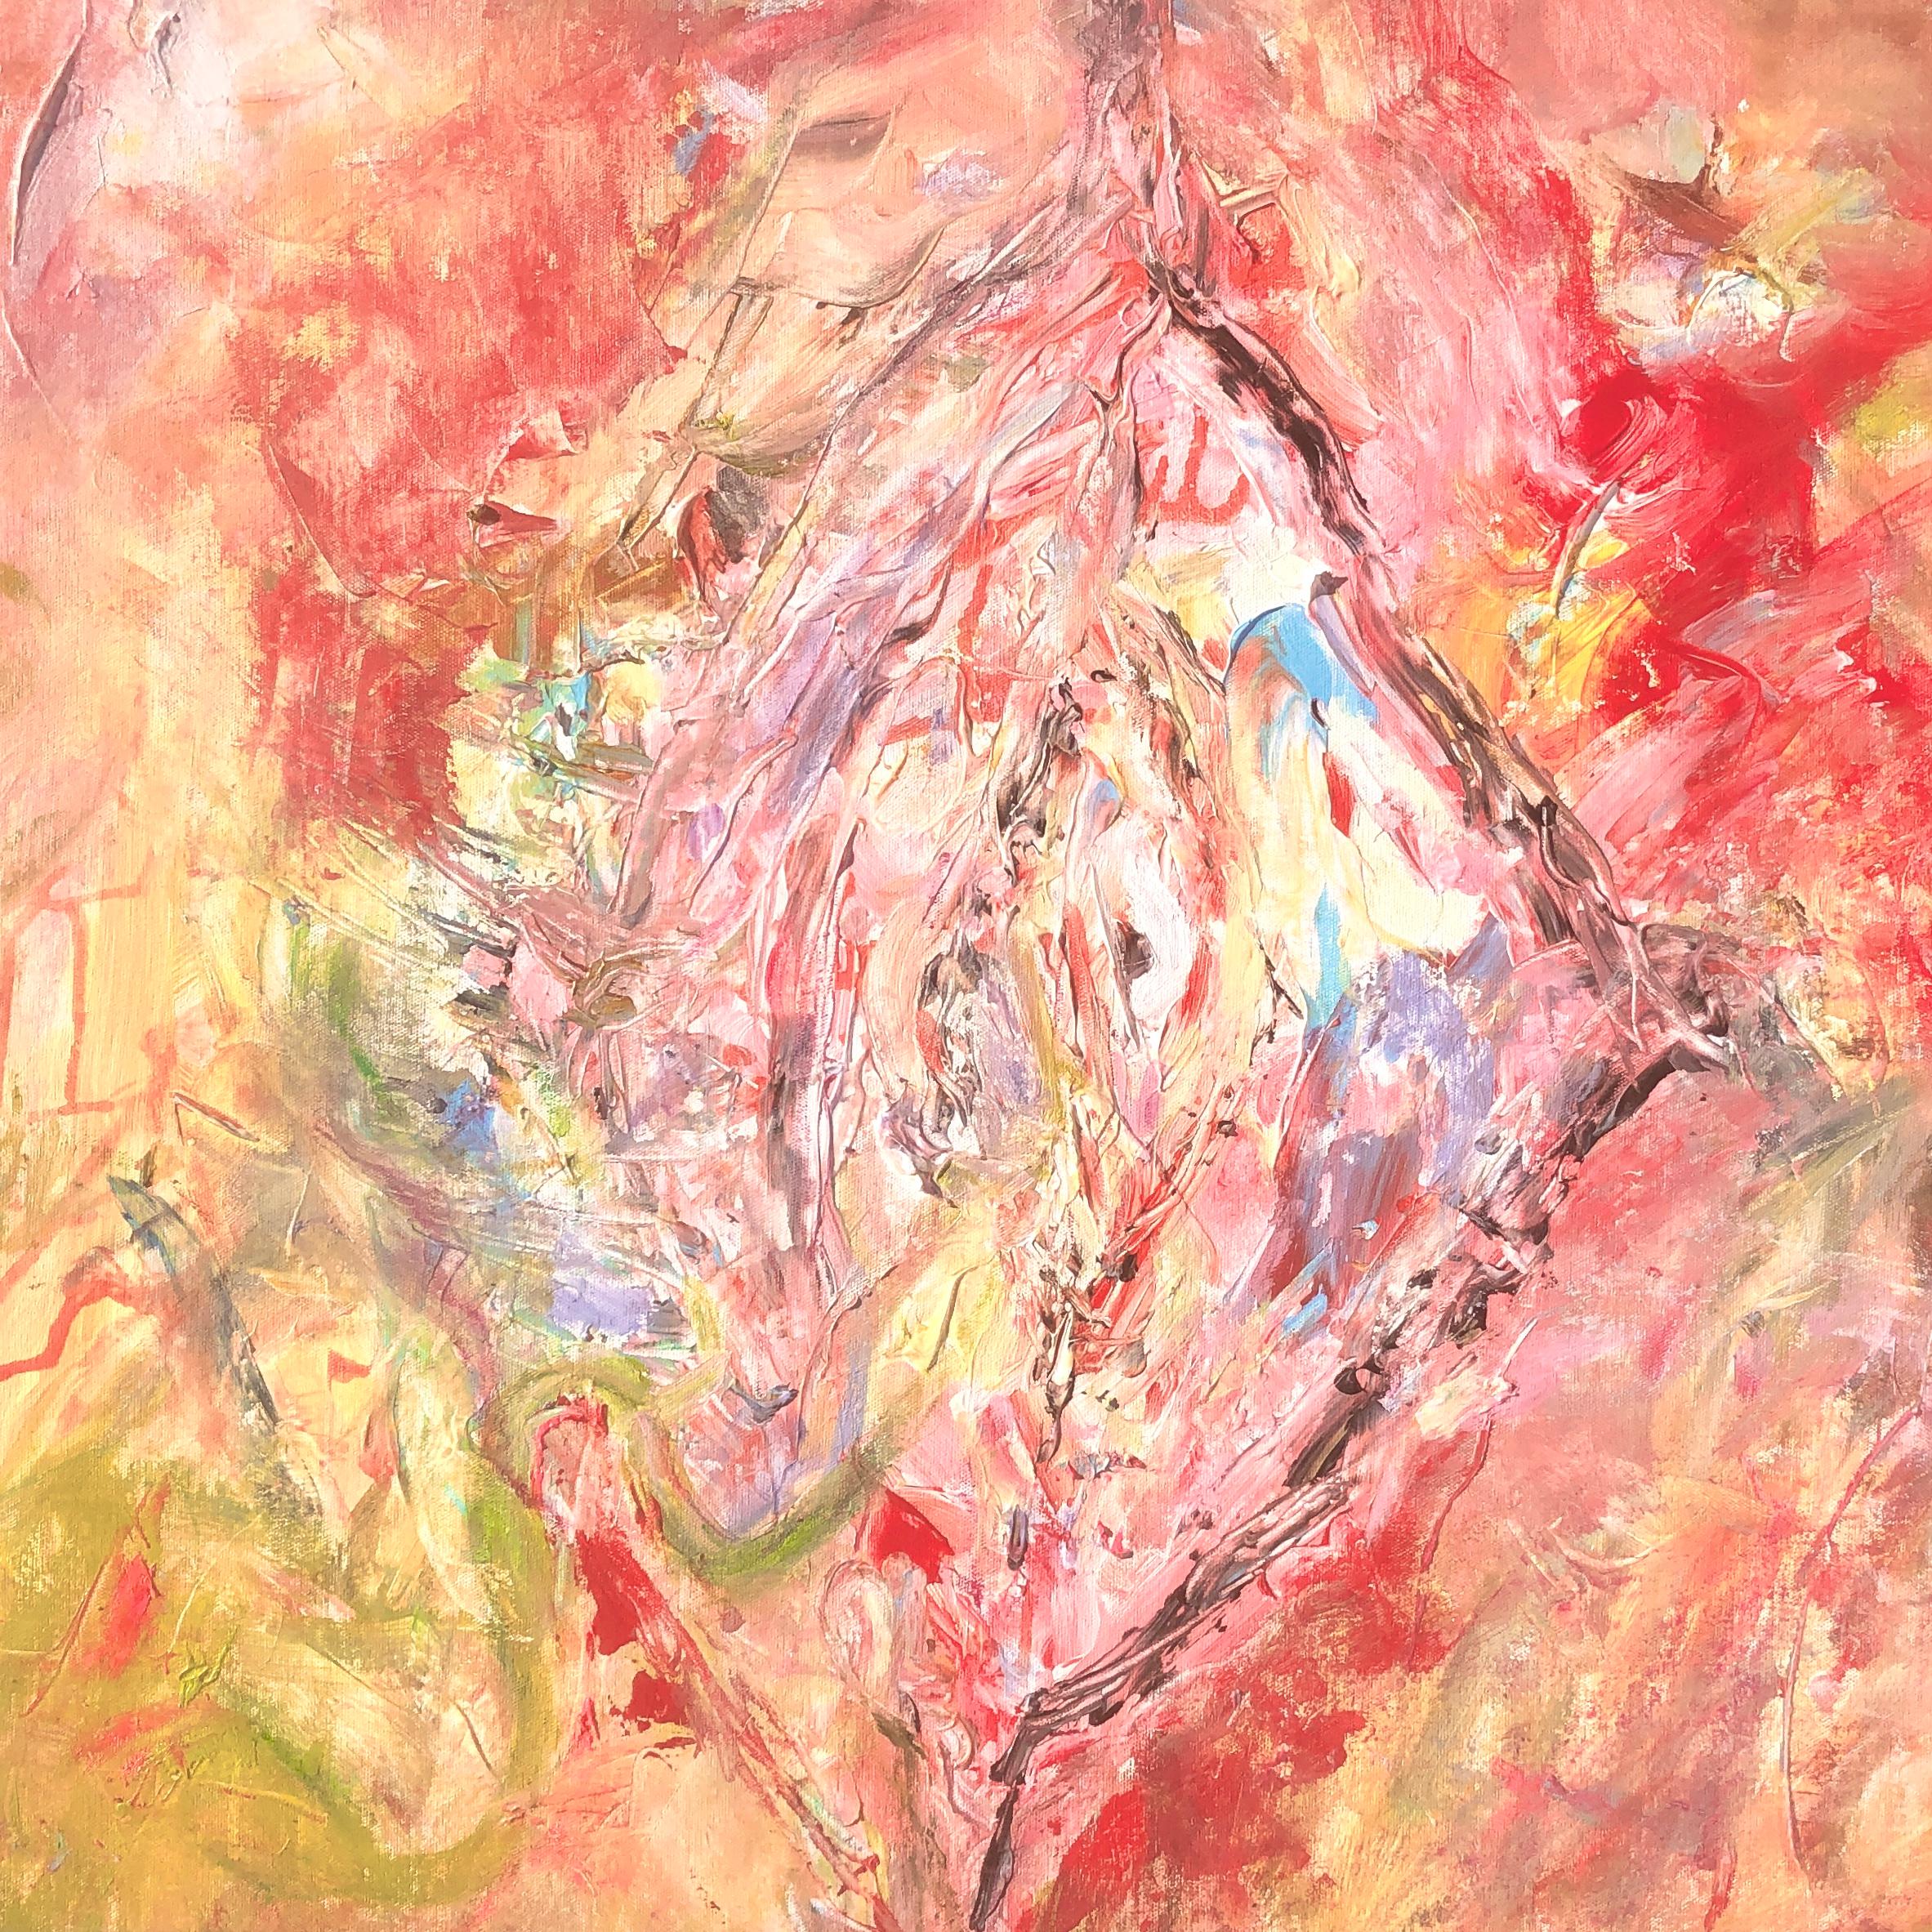 Nerea Caos Abstract Painting - The vagina that sees everything oil on canvas painting abstract expressionist